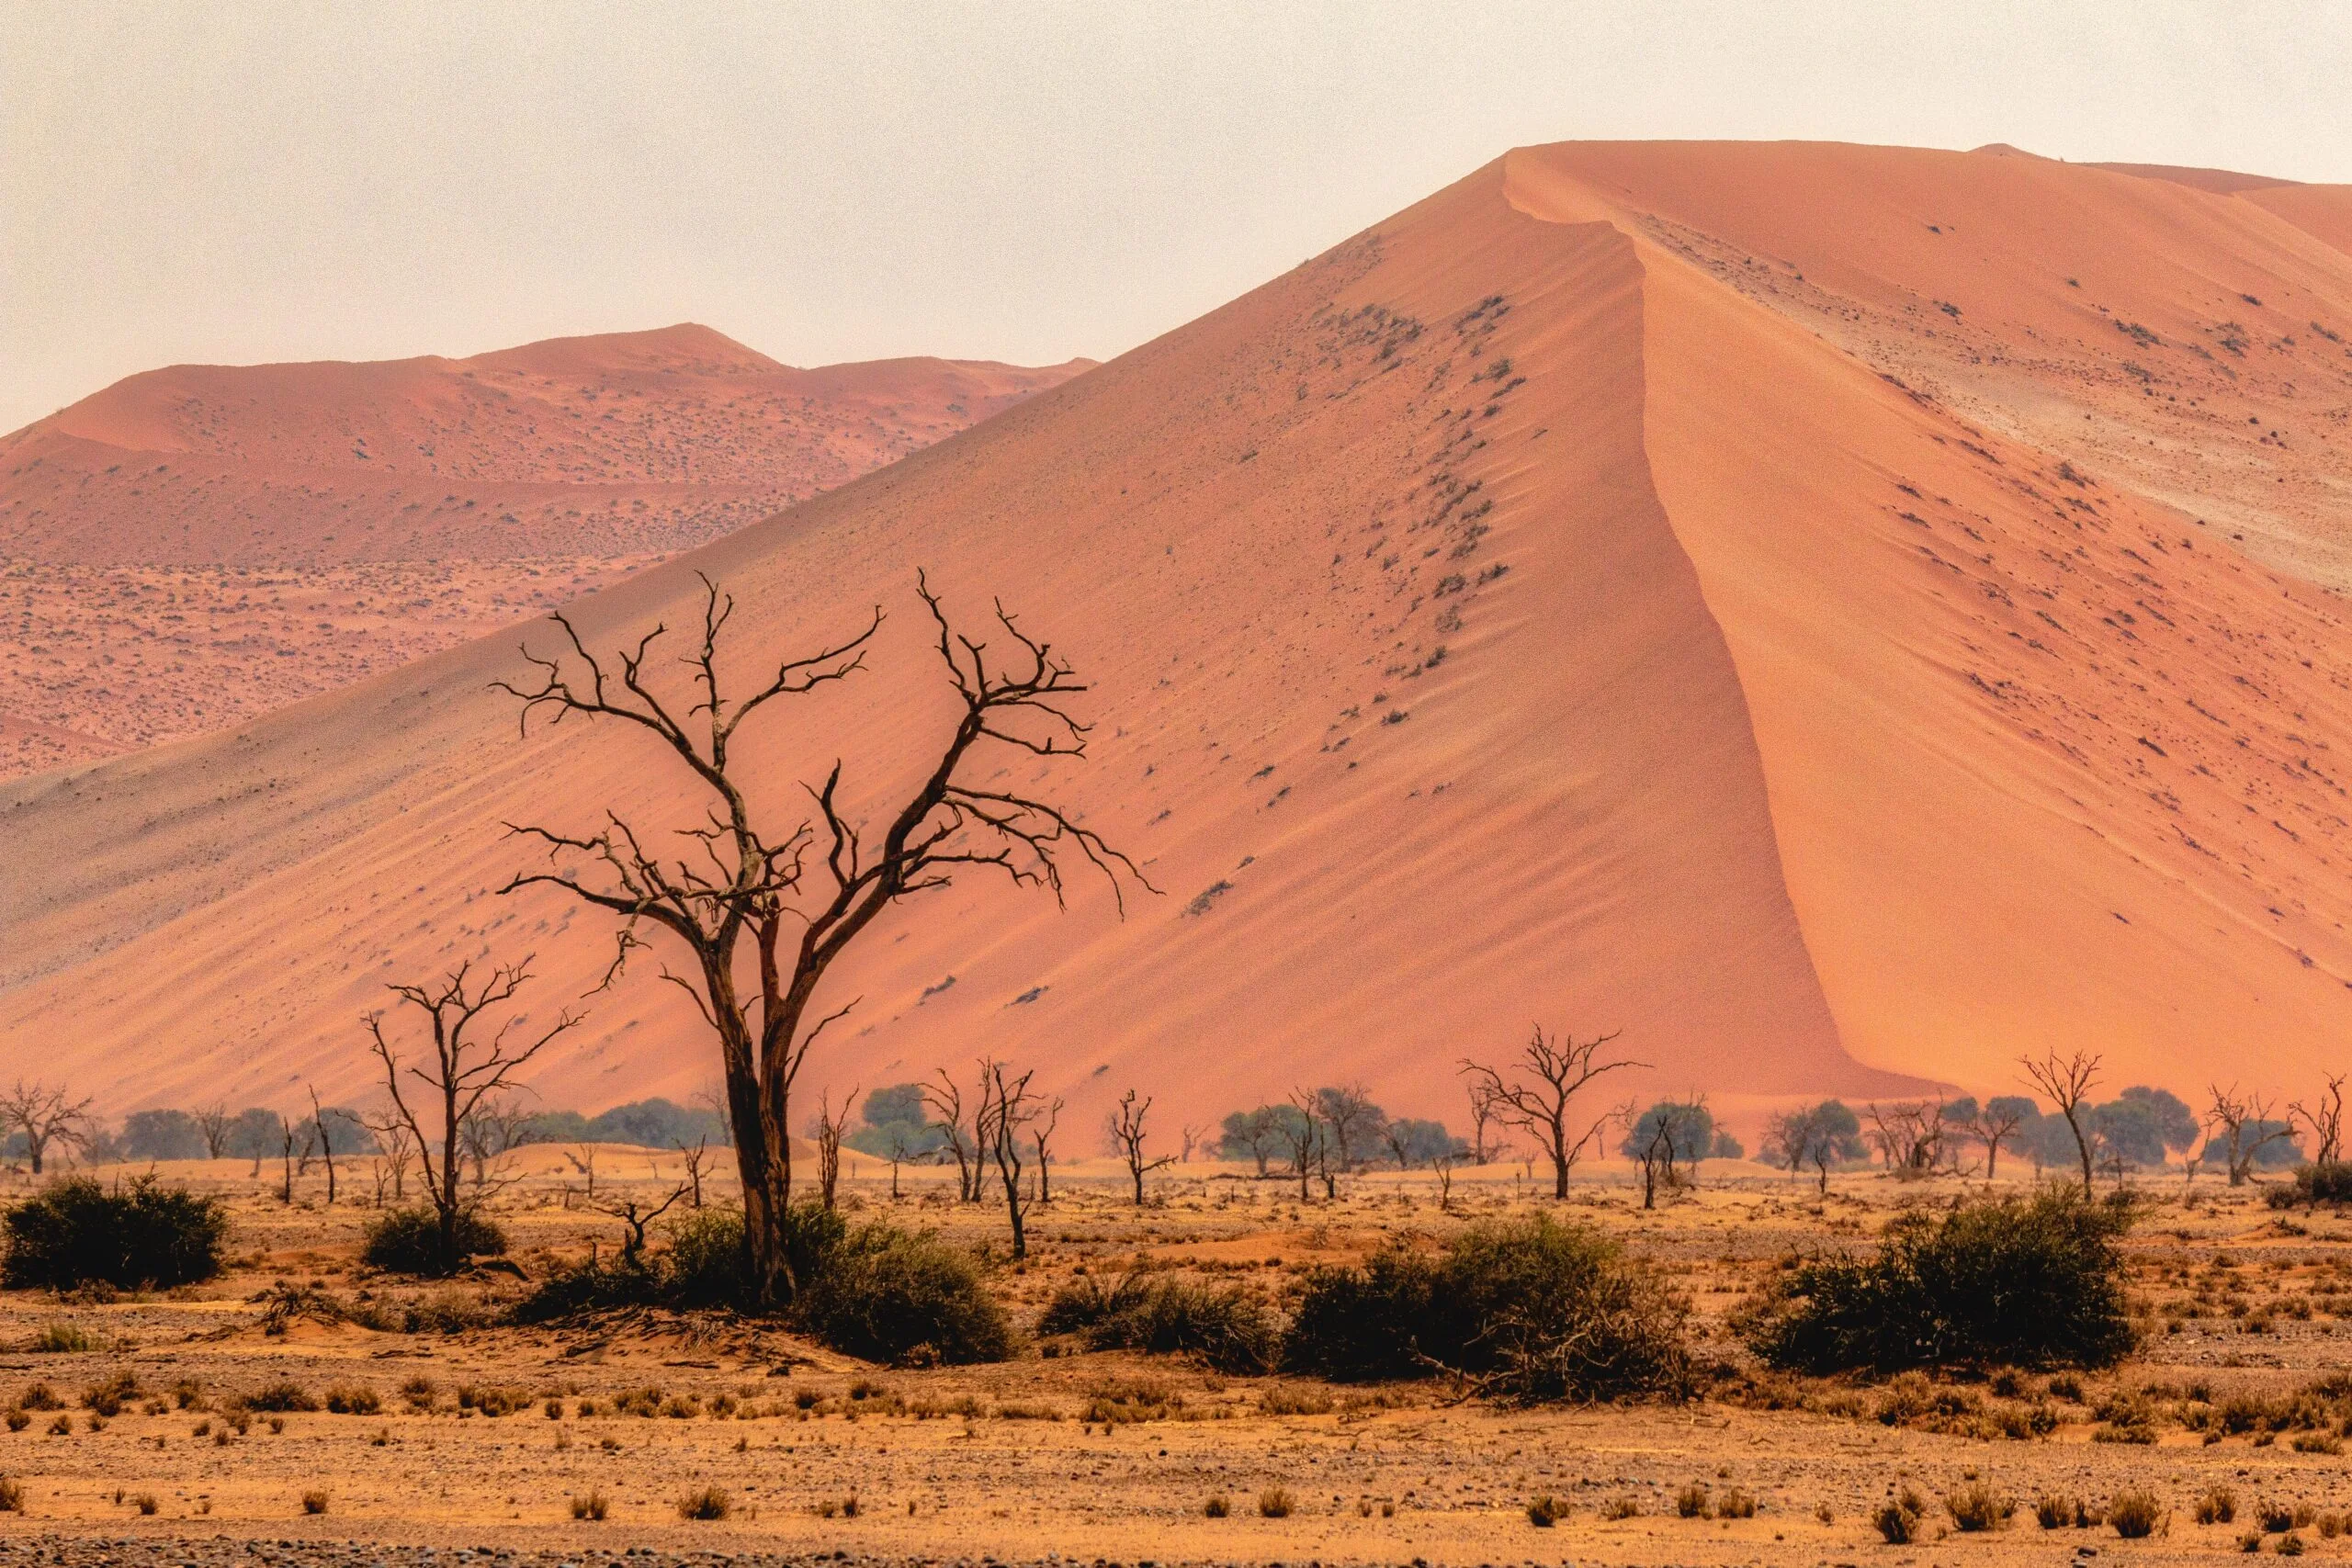 Namibia&#8217;s PEOPLE AND ITS IMPORTANT IN REGION, Safari World Tours